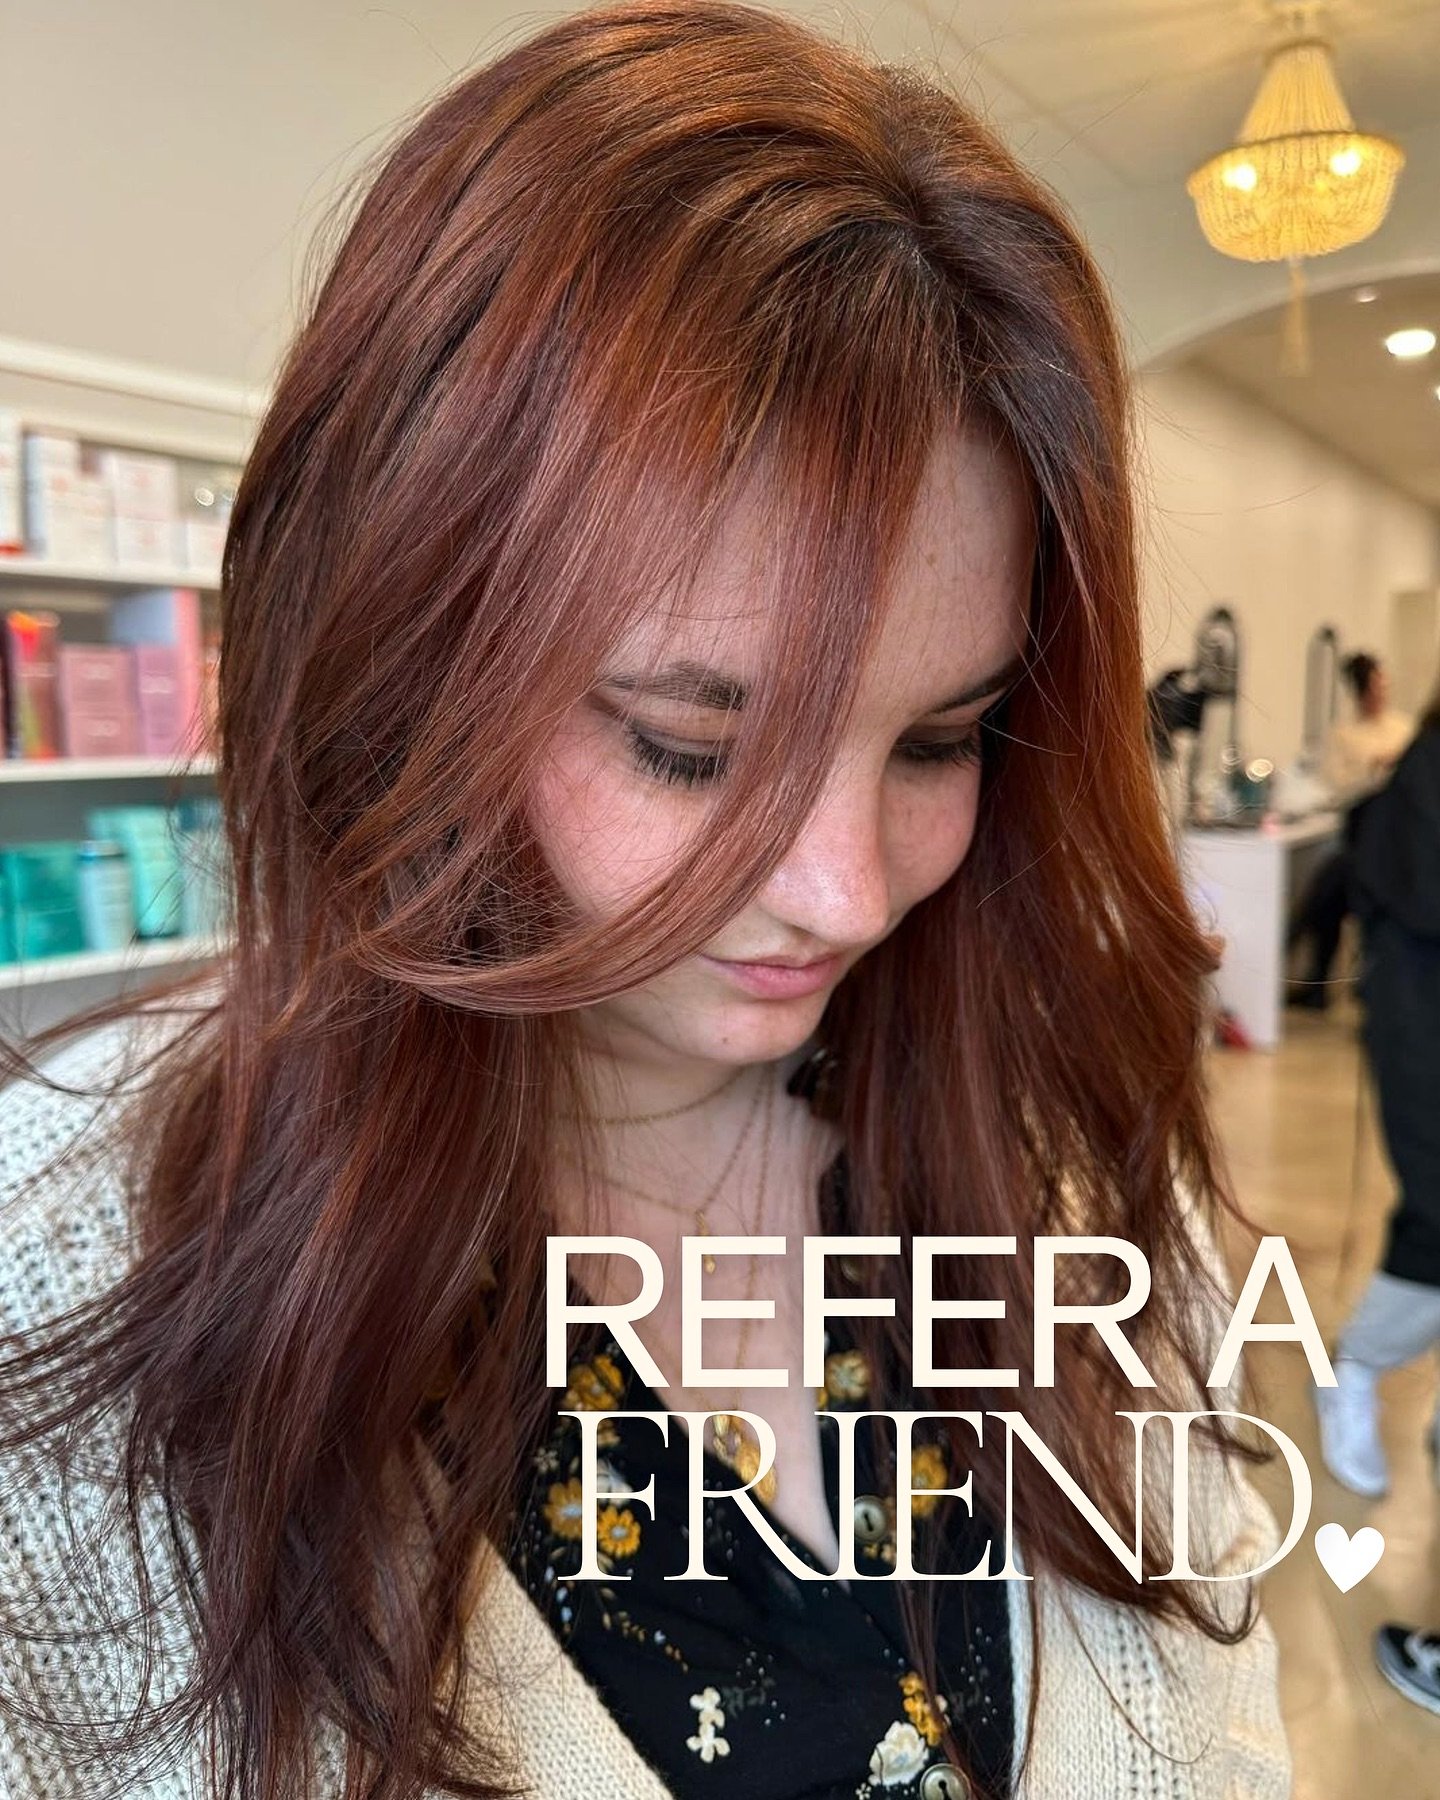 Did you know that if you bring in a referral you&rsquo;ll get a $20 gift card in your mailbox? (Who doesn&rsquo;t love surprise mail?!)

Hair by Alyssa

Make sure your address is updated on Meevo or check in with our front desk team to make sure we h